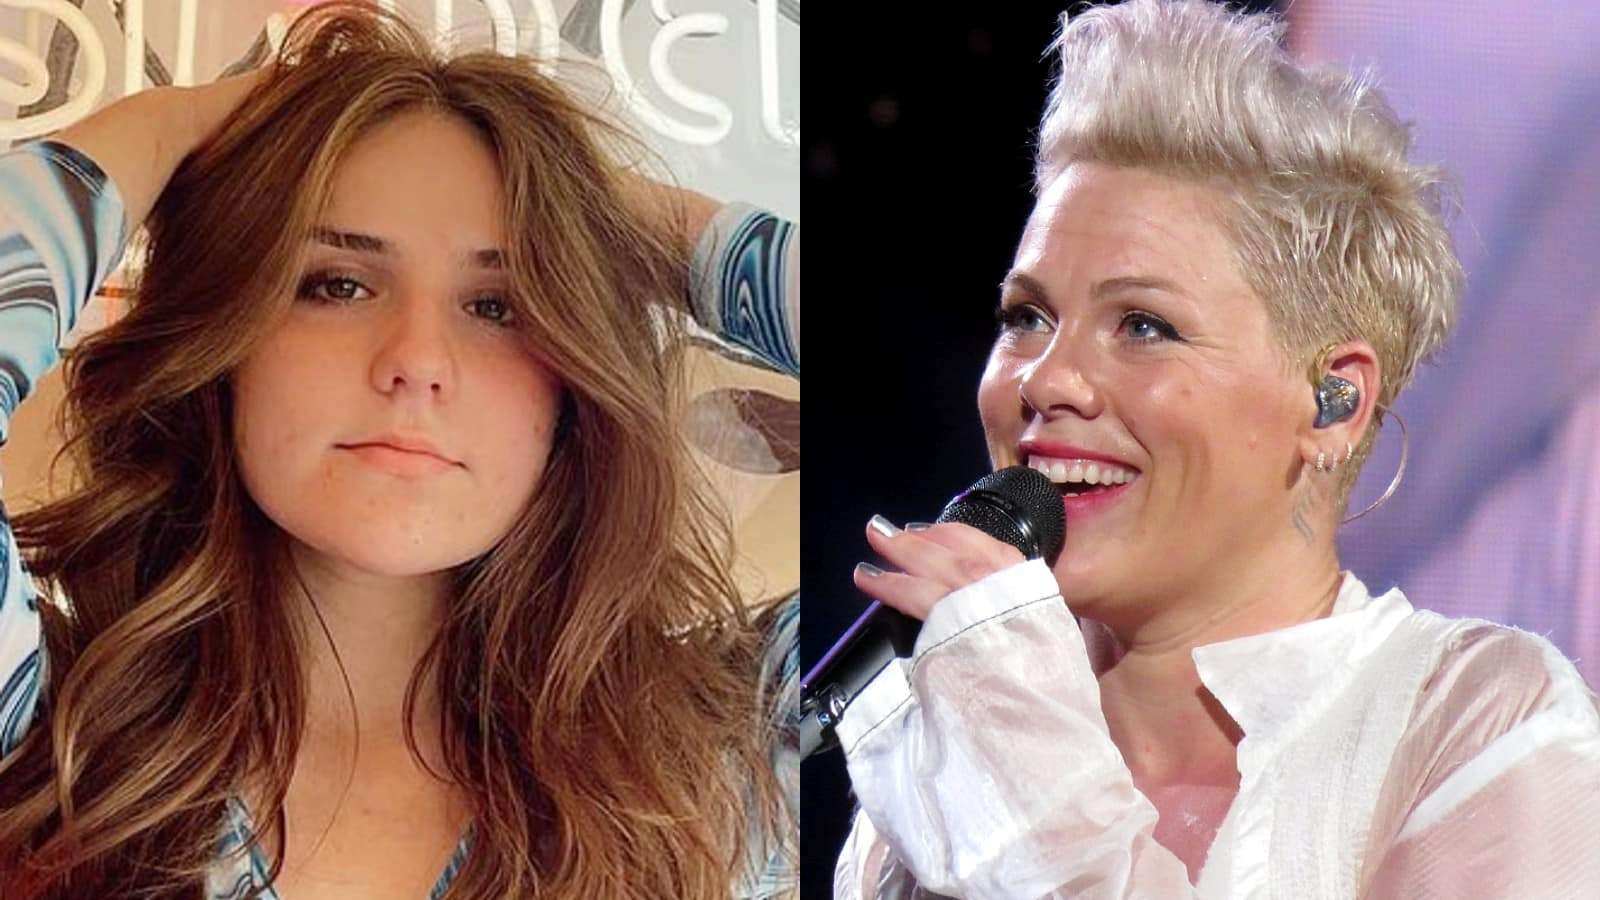 Piper Rockelle next to P!nk